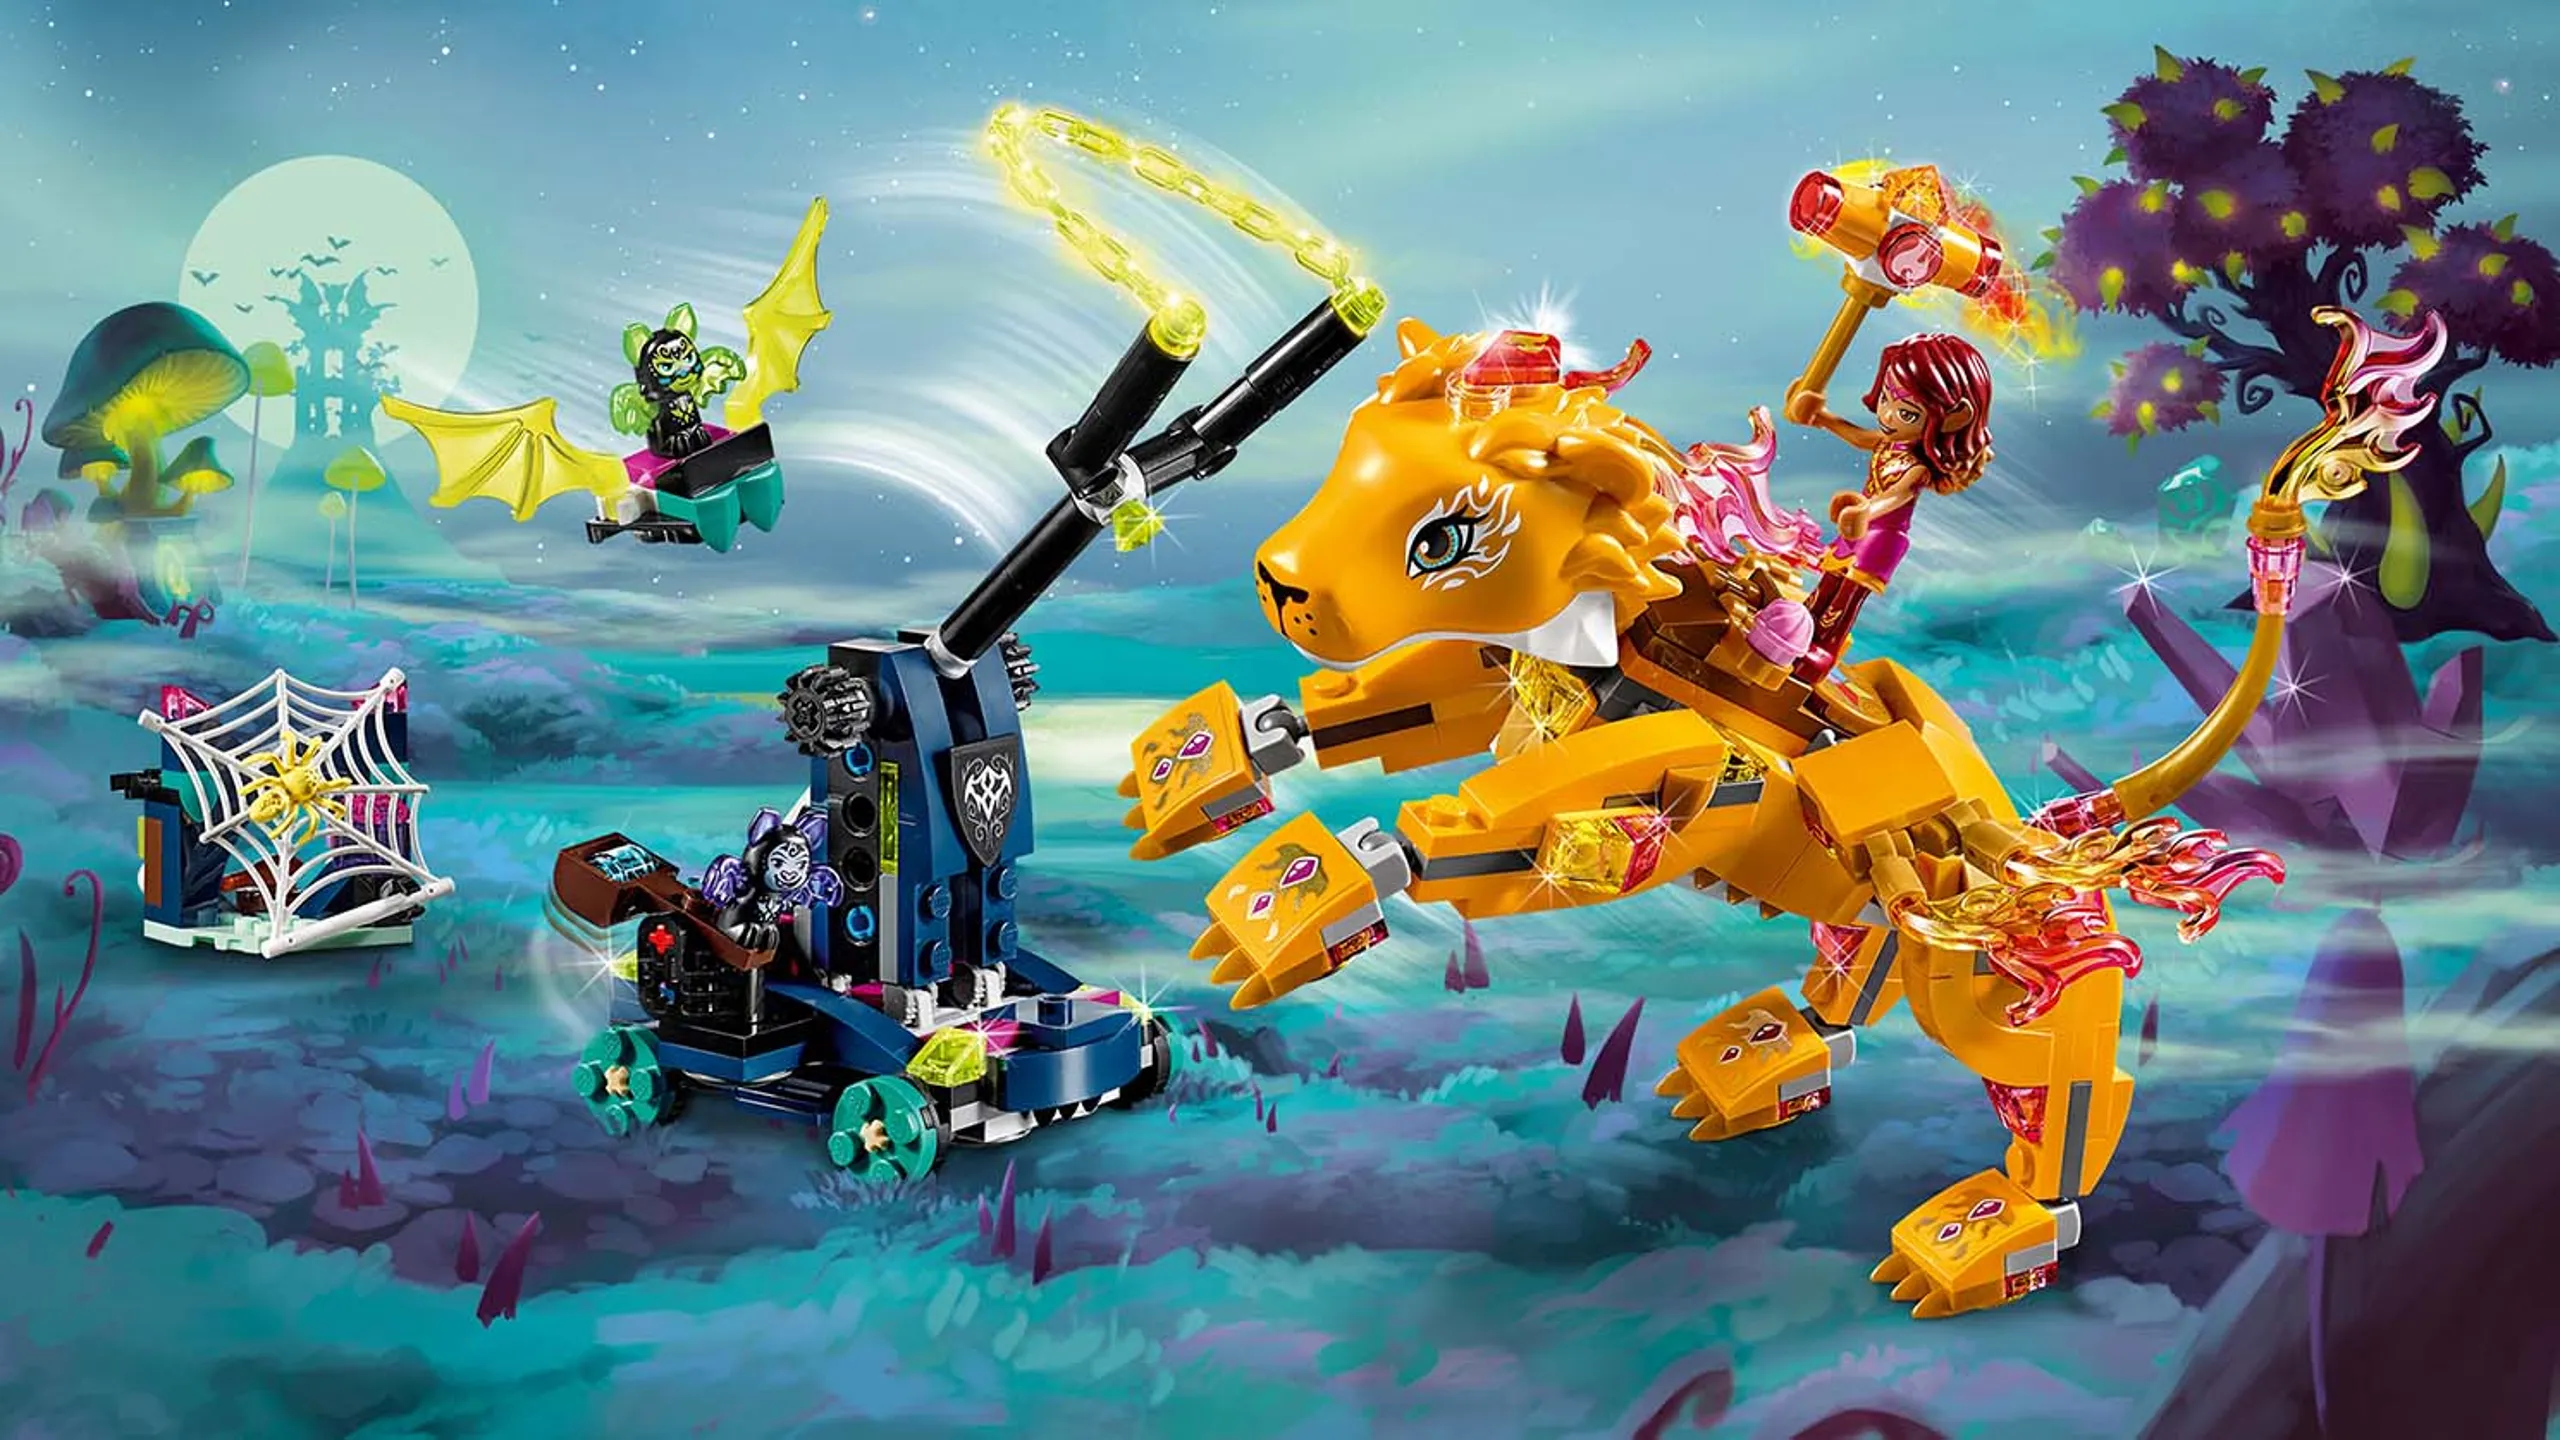 LEGO Elves - 41192 Azari & the fire Lion Capture - Help Azari and Rowan the Guardian Fire Lion unite their magic to fight off the shadow bats and try to remove the evil chain from around Rowan’s neck.